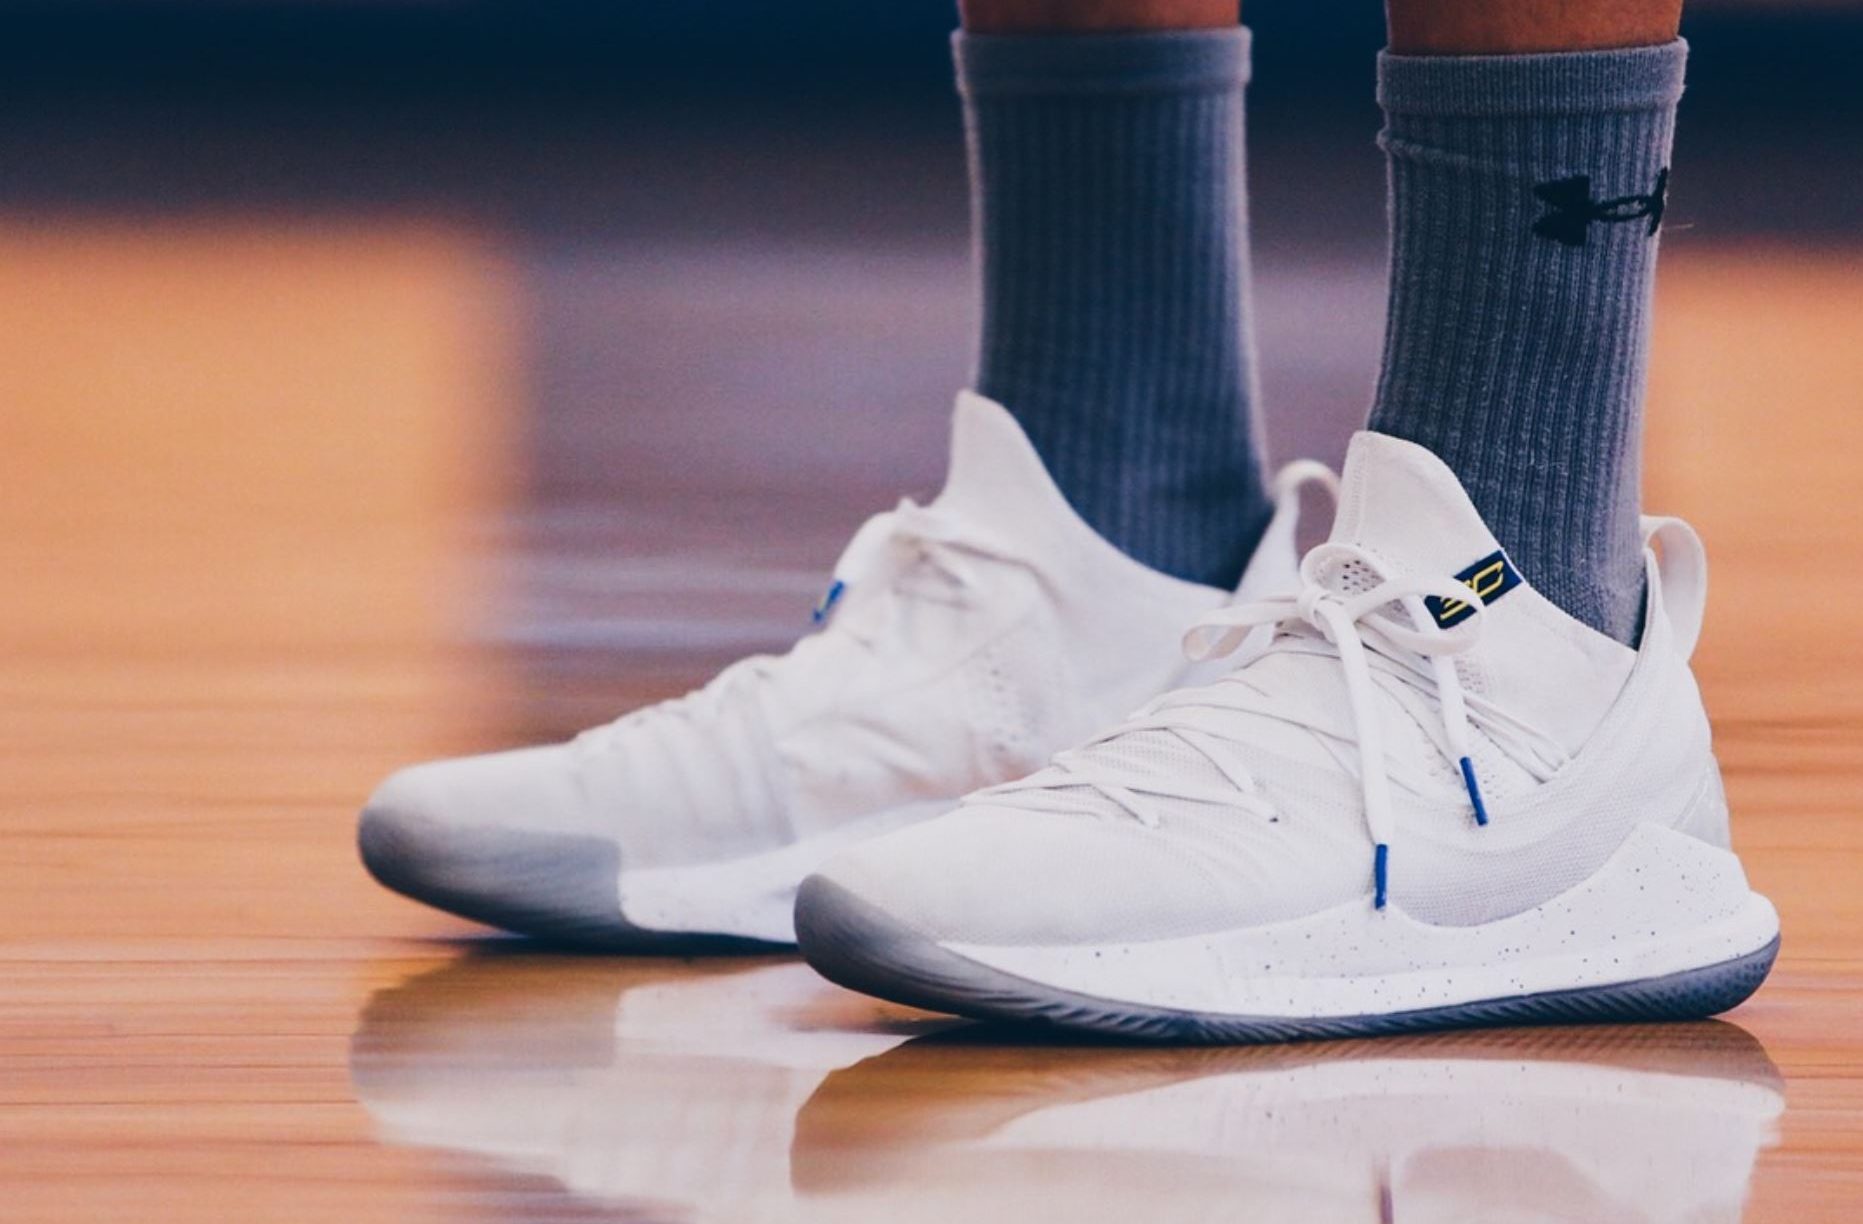 Steph Curry Practices in New Curry 5 PE 